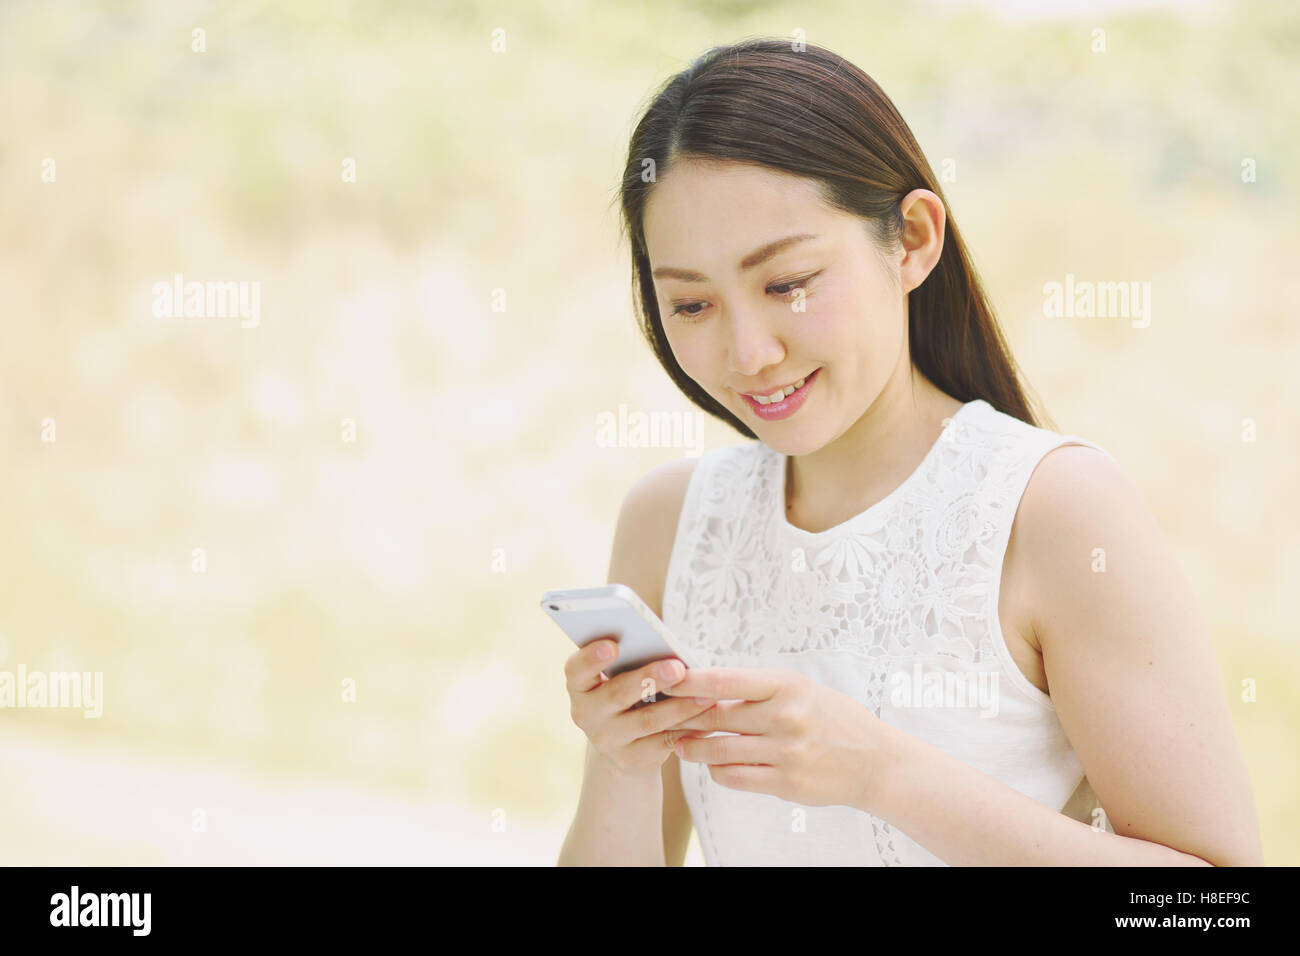 Portrait of young Japanese woman with smartphone Stock Photo